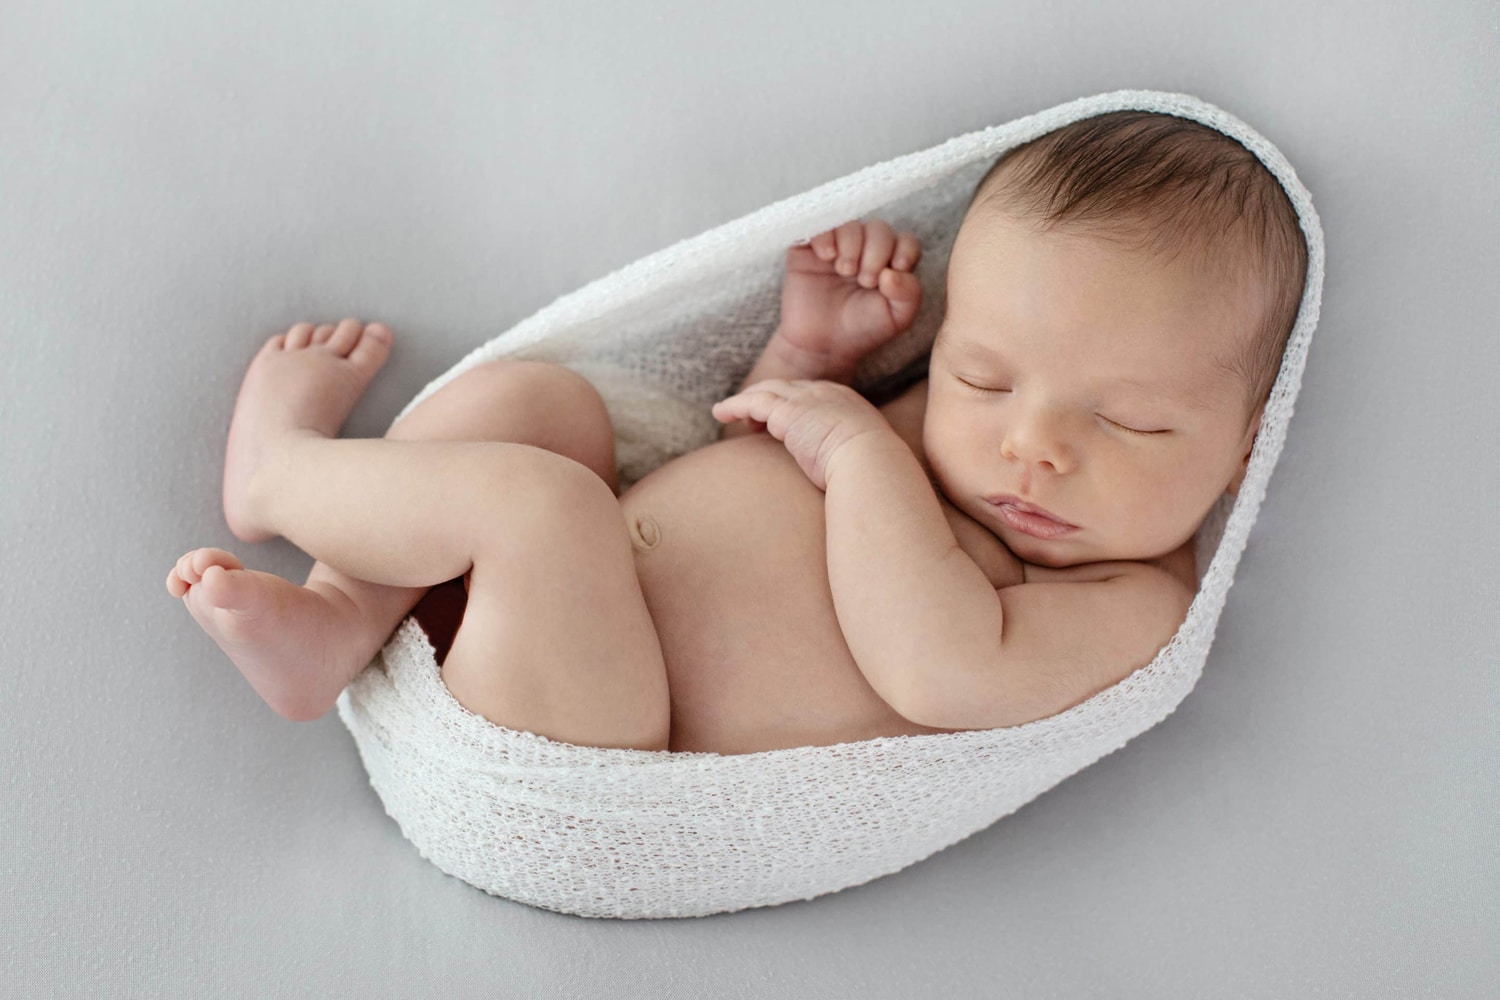 A newborn baby wrapped in a white swaddle.